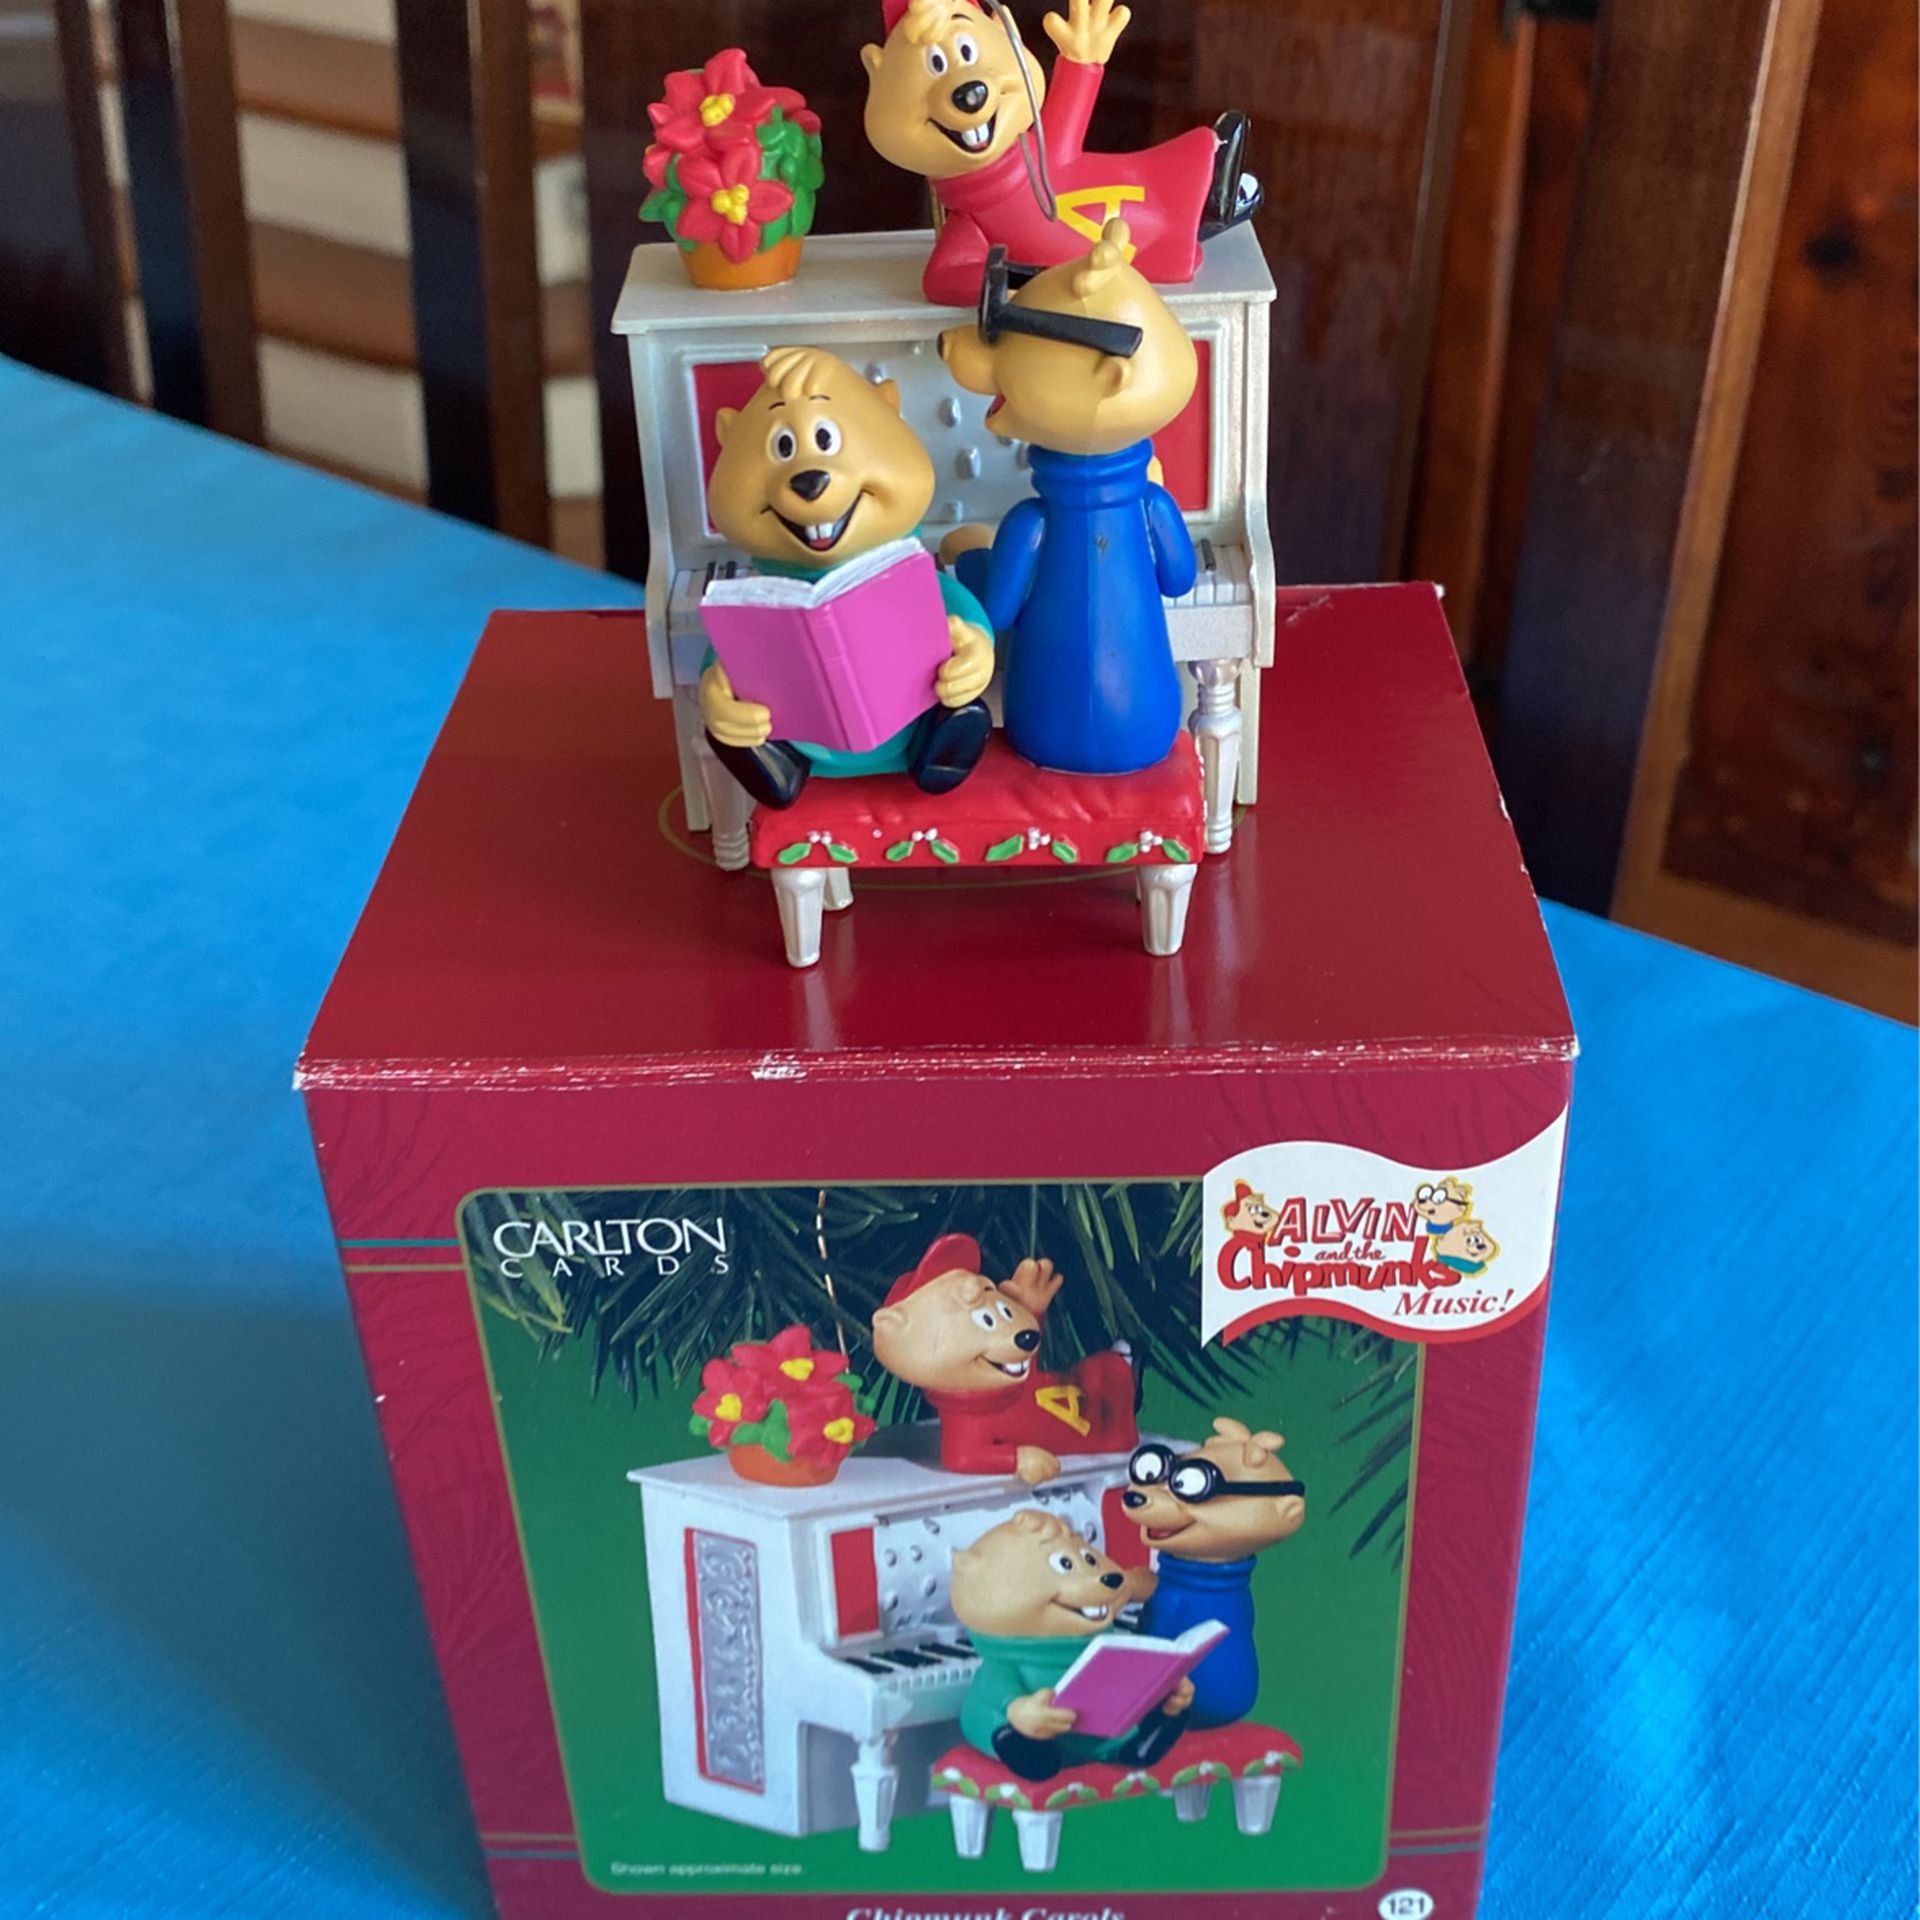 Heirloom collection Colton cards Alvin and the Chipmunks chipmunks Carol’s 2001 vintage collectible in the original box